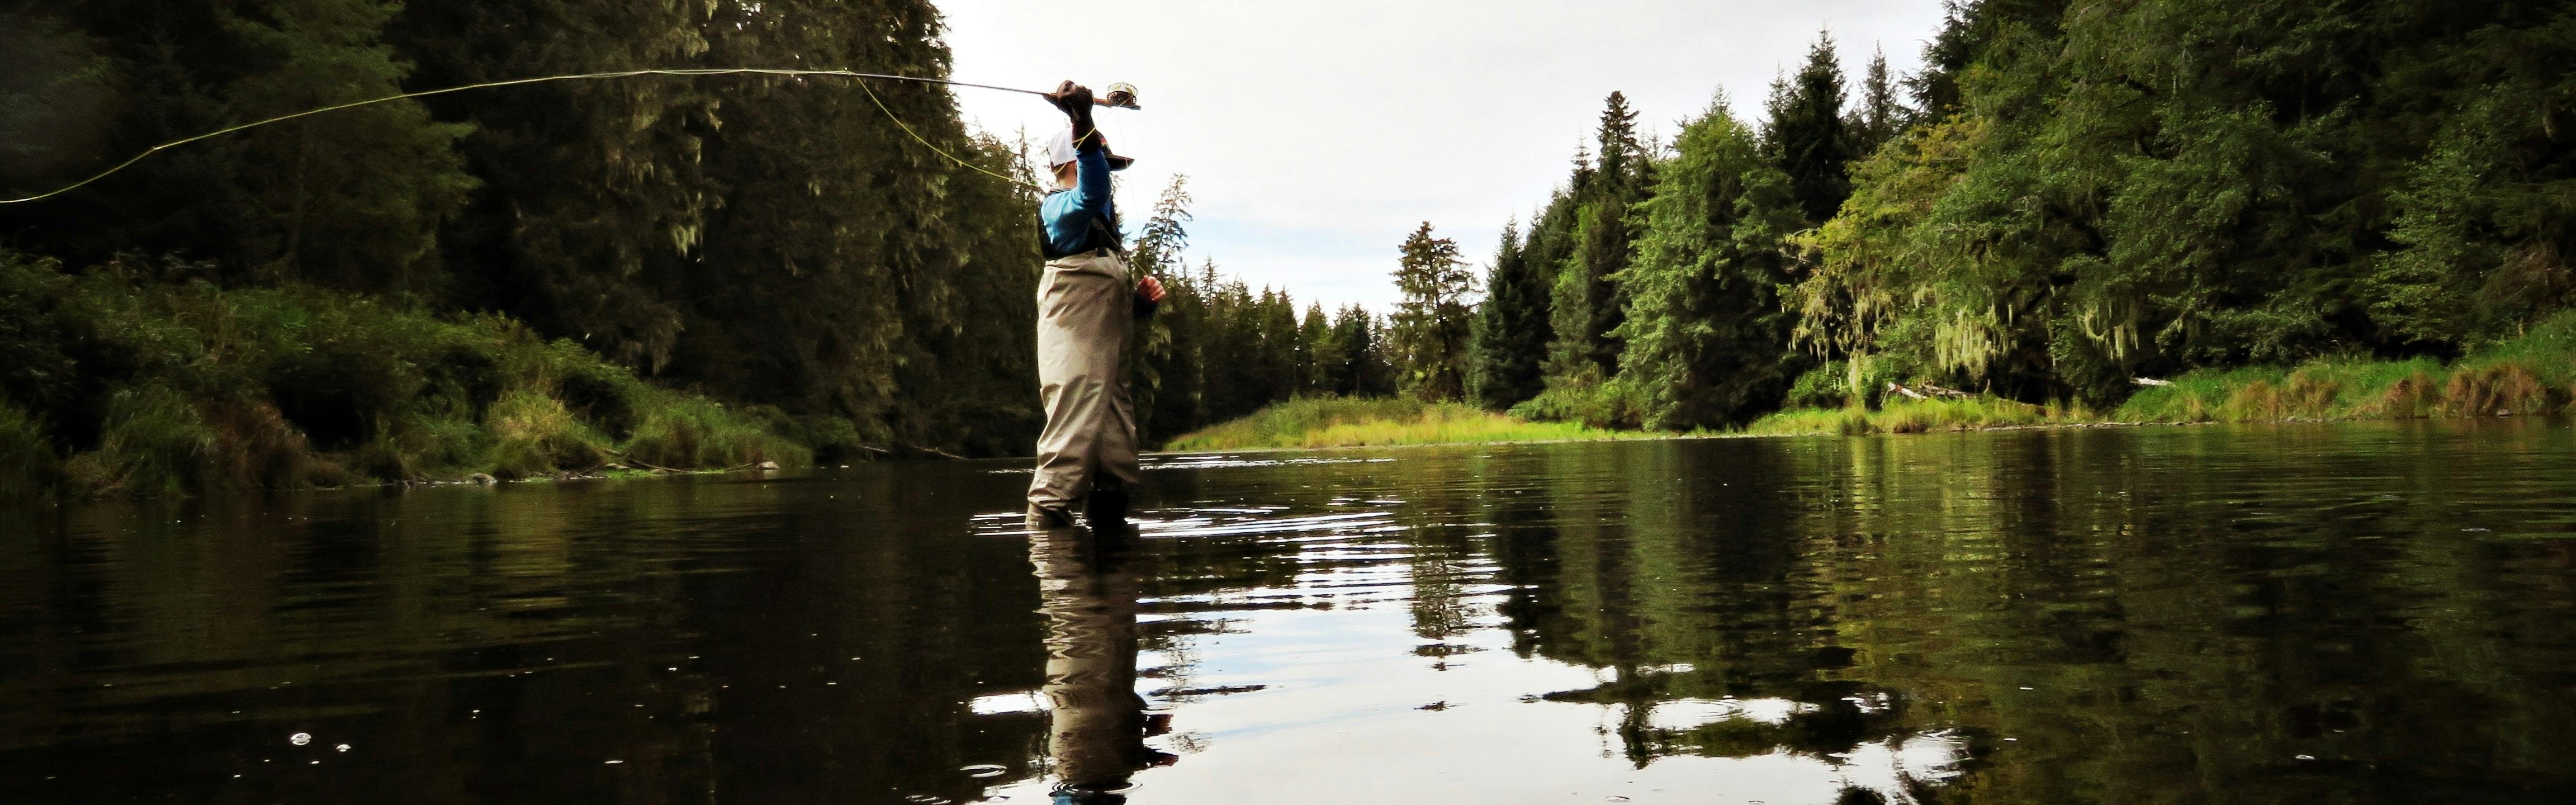 A fly fisher standing in a river casts his rod.